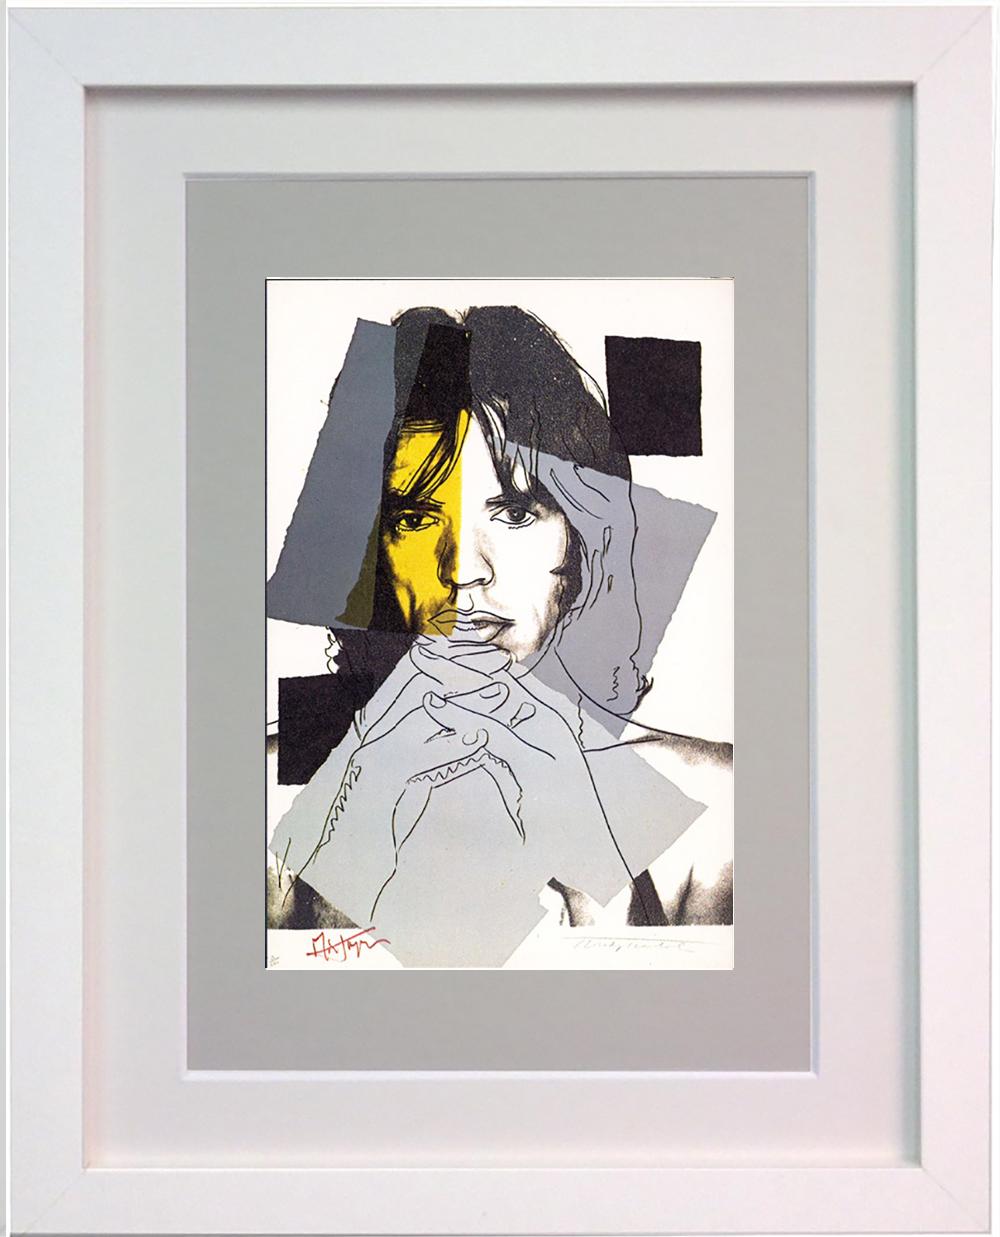 (after) Andy Warhol Figurative Print - Andy Warhol, 'Mick Jagger FSII.143, Framed Announcement-card, 1975